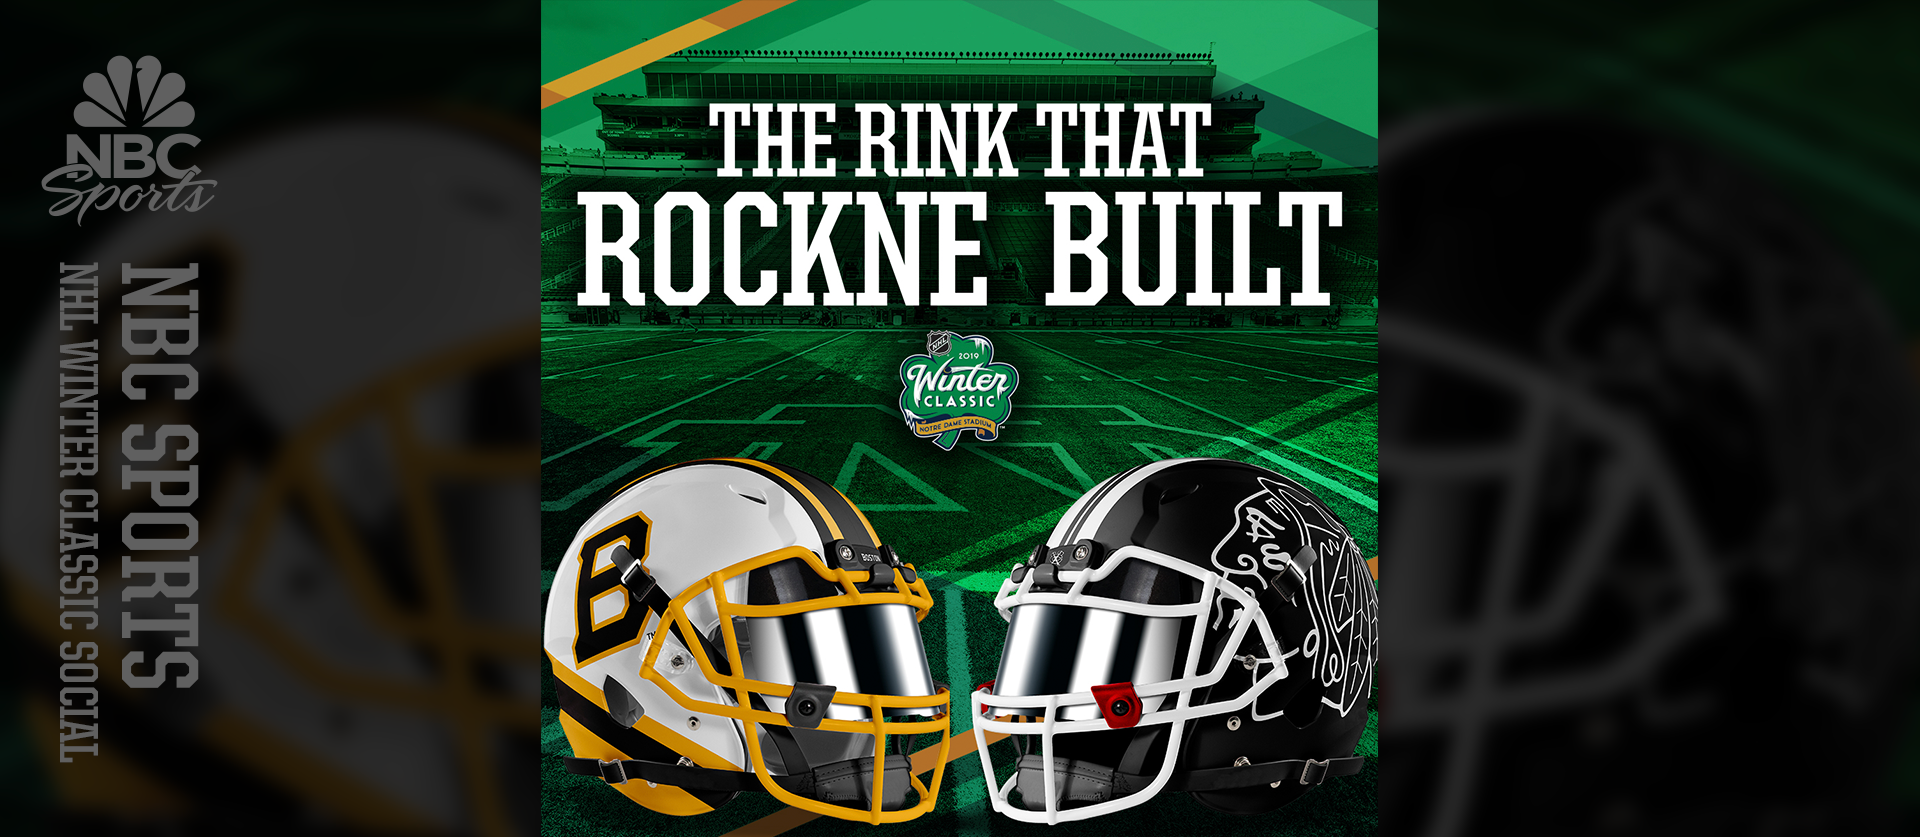 NHL Winter Classic - The Rink That Rockne Built